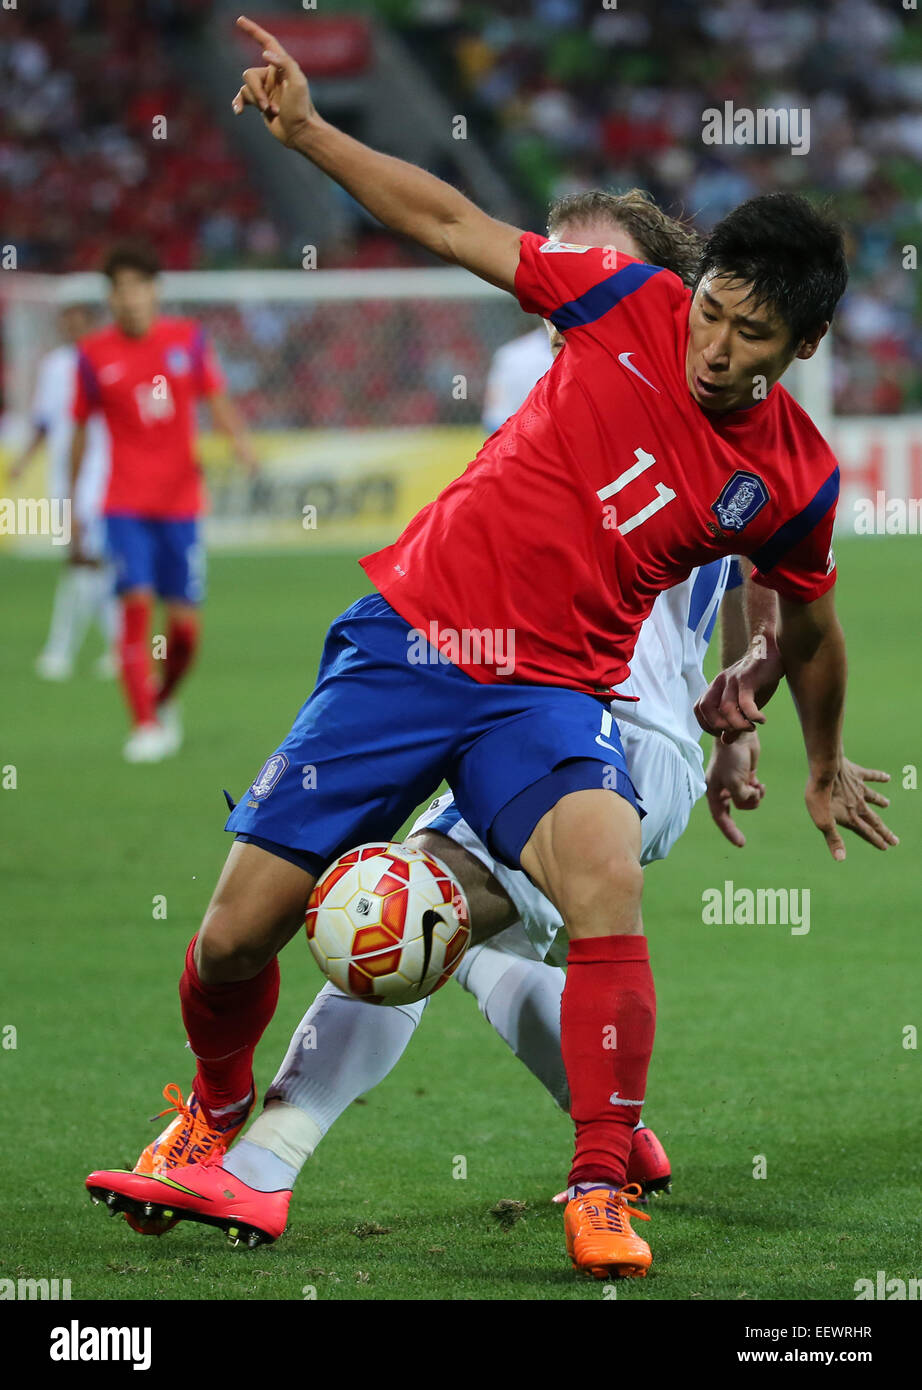 Melbourne, Australia. 22nd January, 2015. South Korea's Lee Keun Ho fights for the ball during the quarterfinal match against Uzbekistan at the 2015 AFC Asian Cup in Melbourne, Australia, Jan. 22, 2015. South Korea won 2-0 in extra time to reach the semifinals at the AFC Asian Cup. Credit:  Xinhua/Alamy Live News Stock Photo